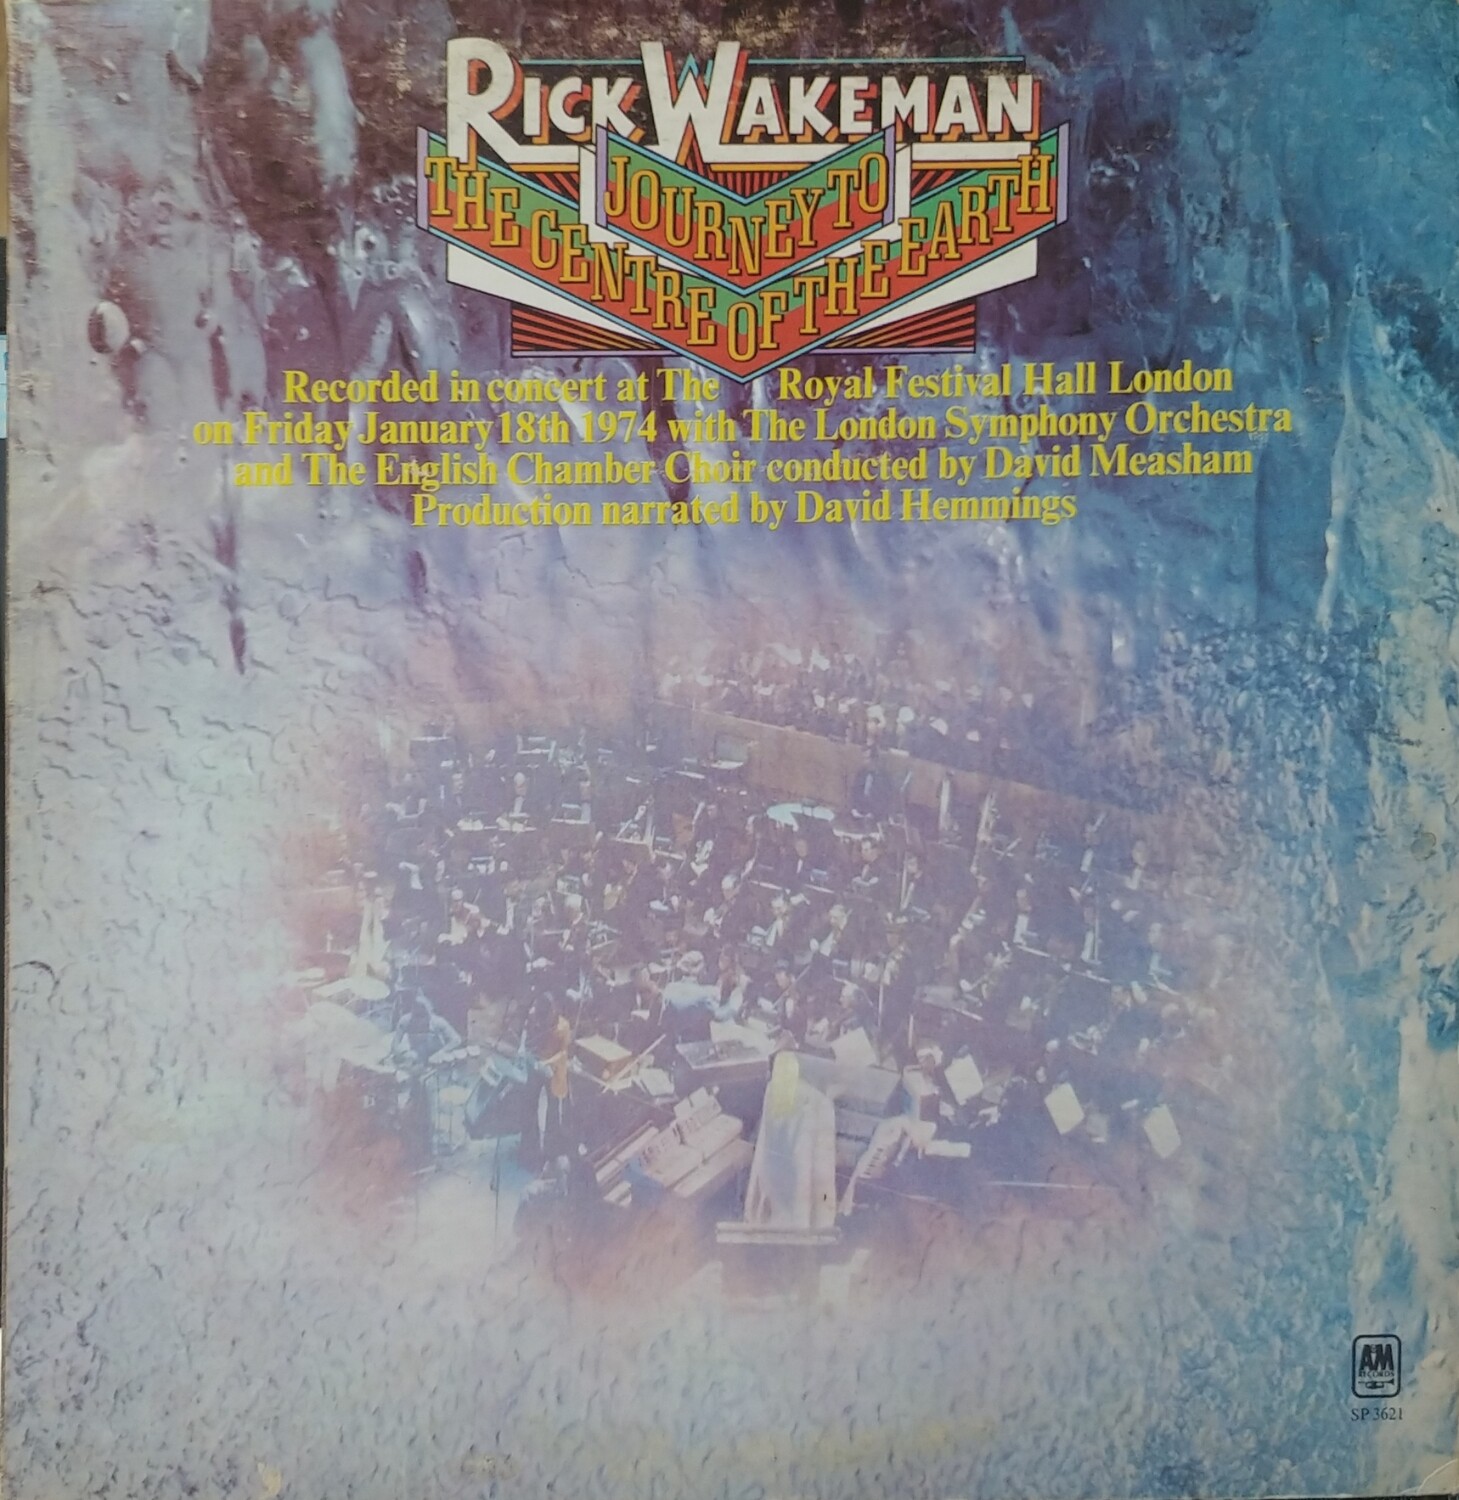 Rick Wakeman - Journey to the centre of the earth